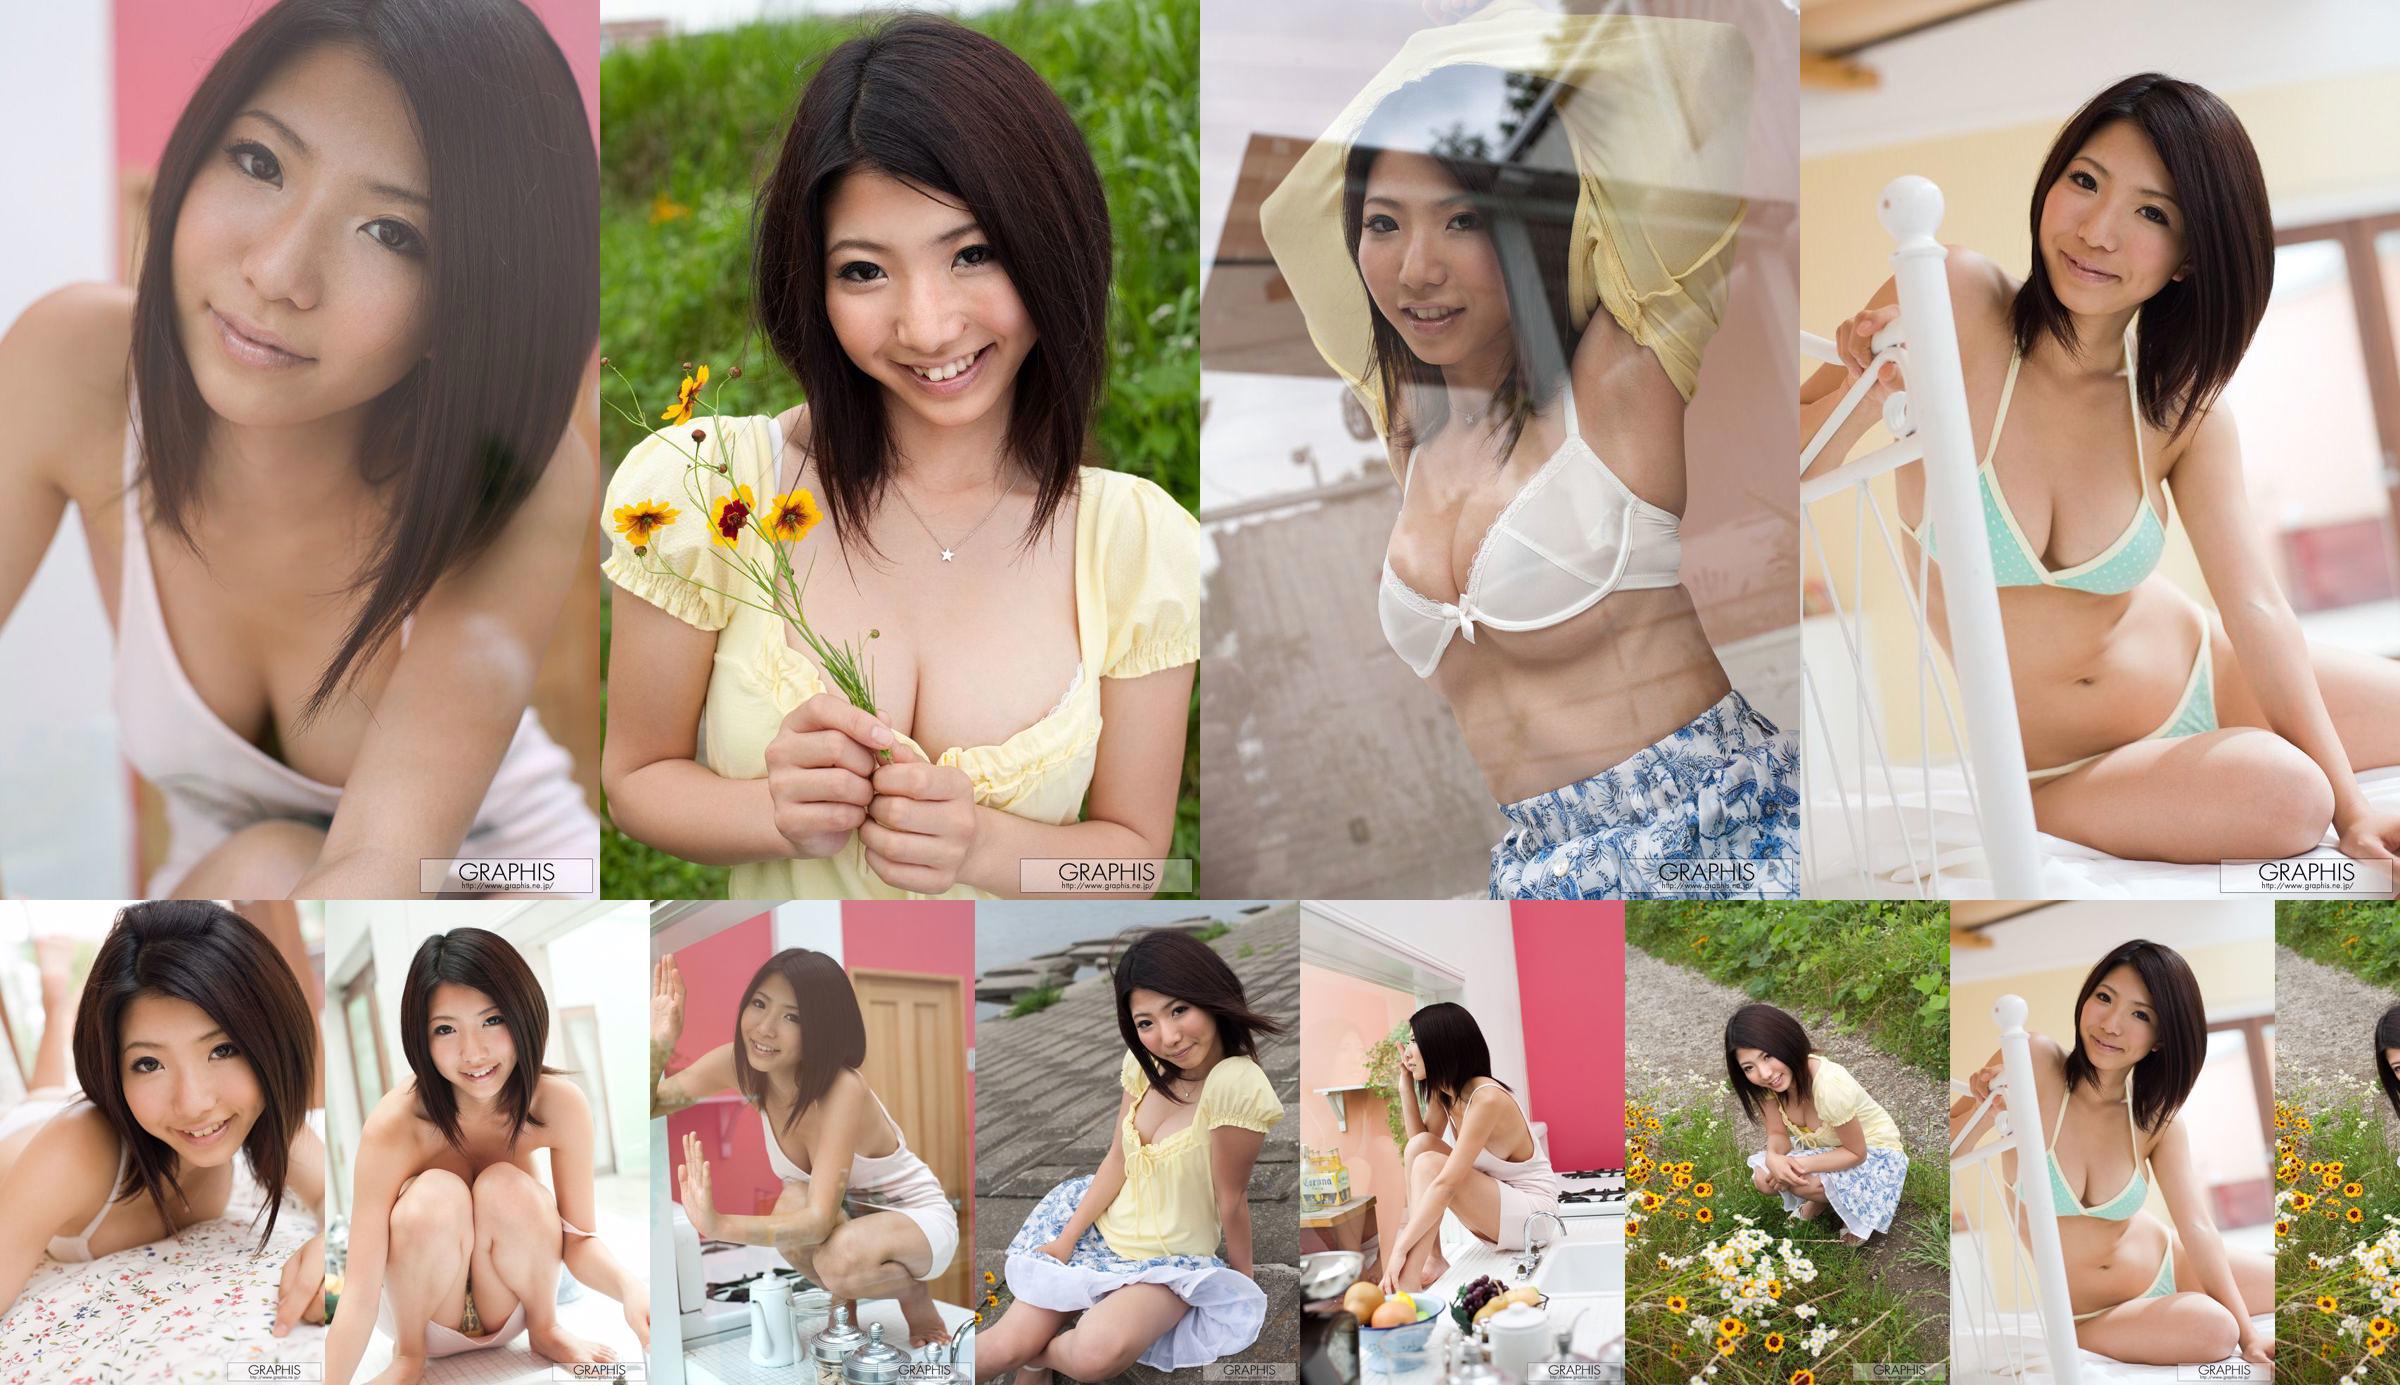 An Ann 《Simple and Innocent》 [Graphis] Gals No.a71097 Seite 3